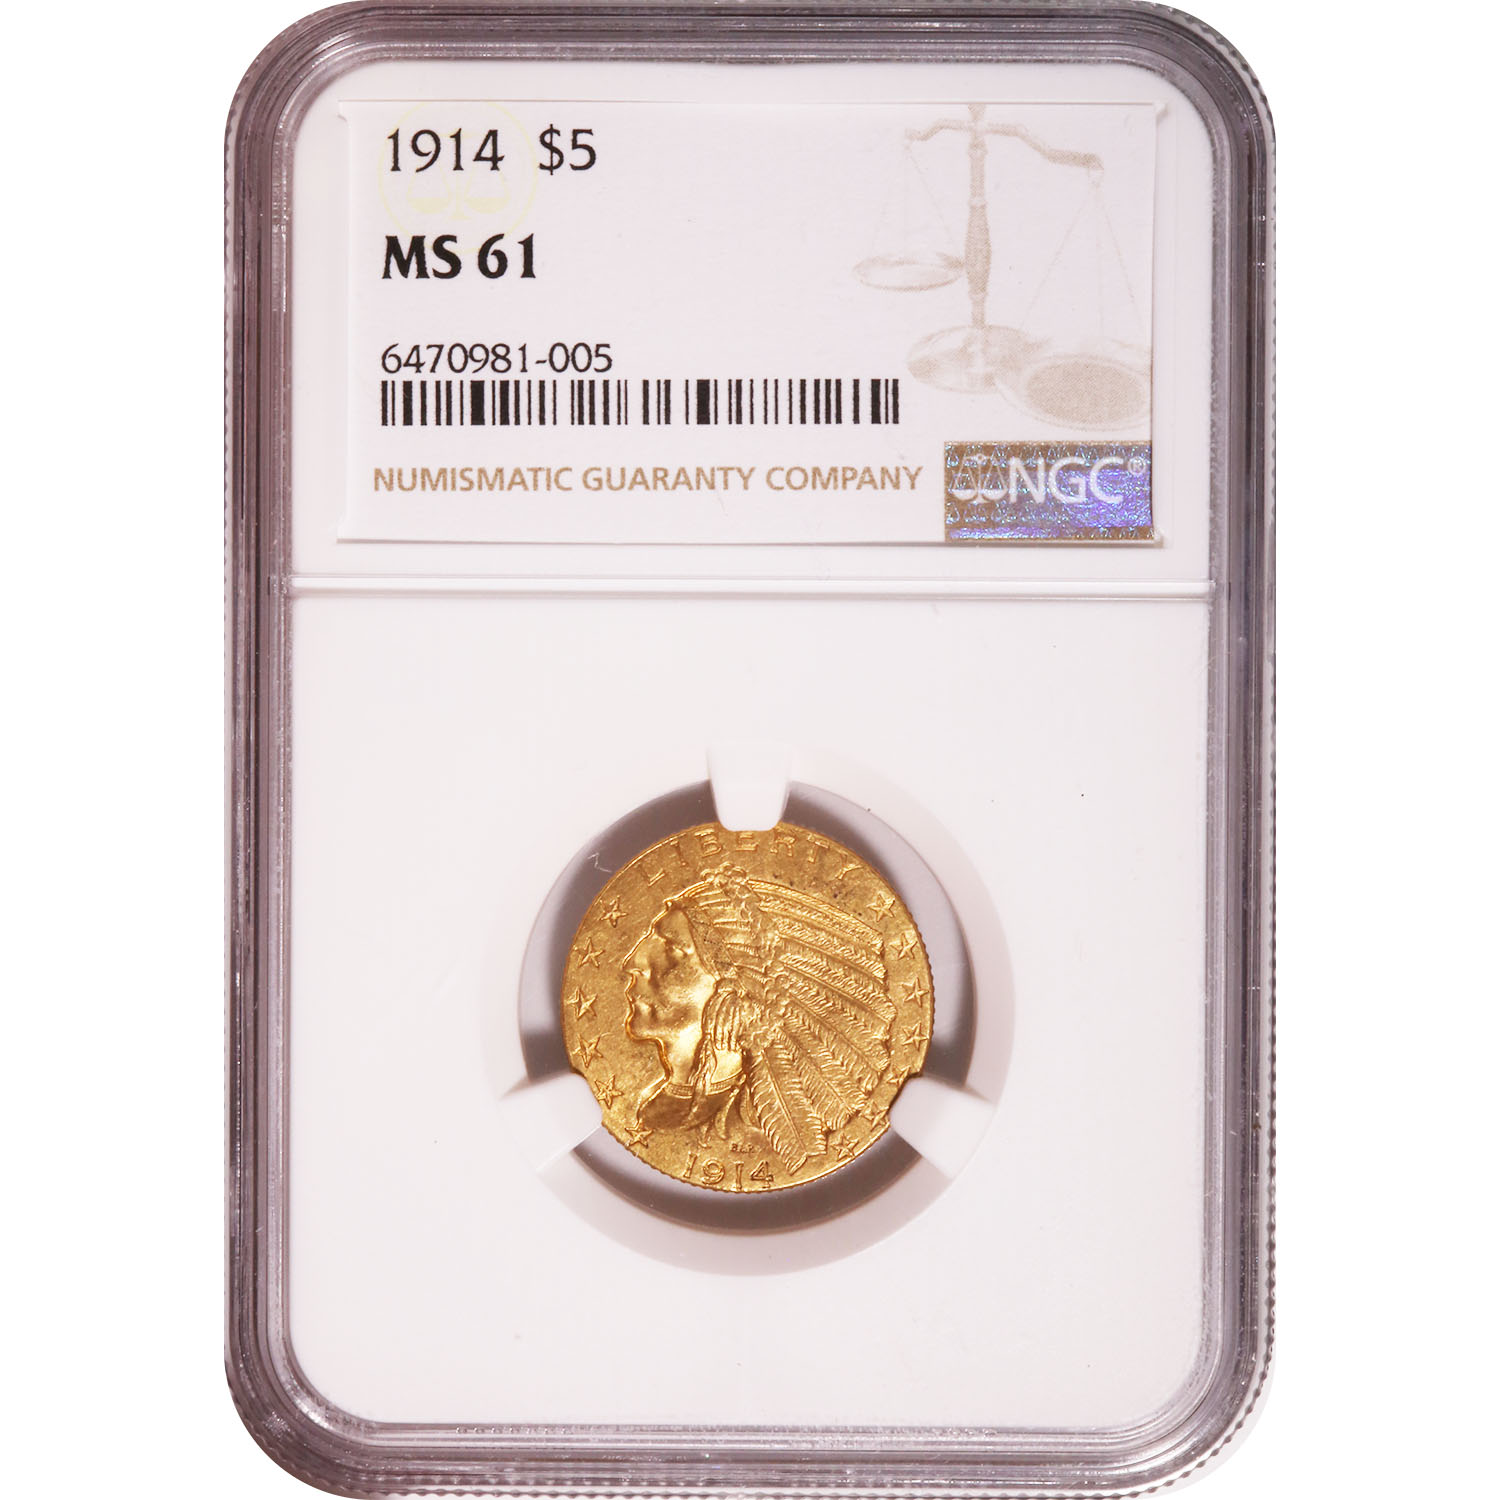 Certified $5 Gold Indian 1914 MS61 NGC